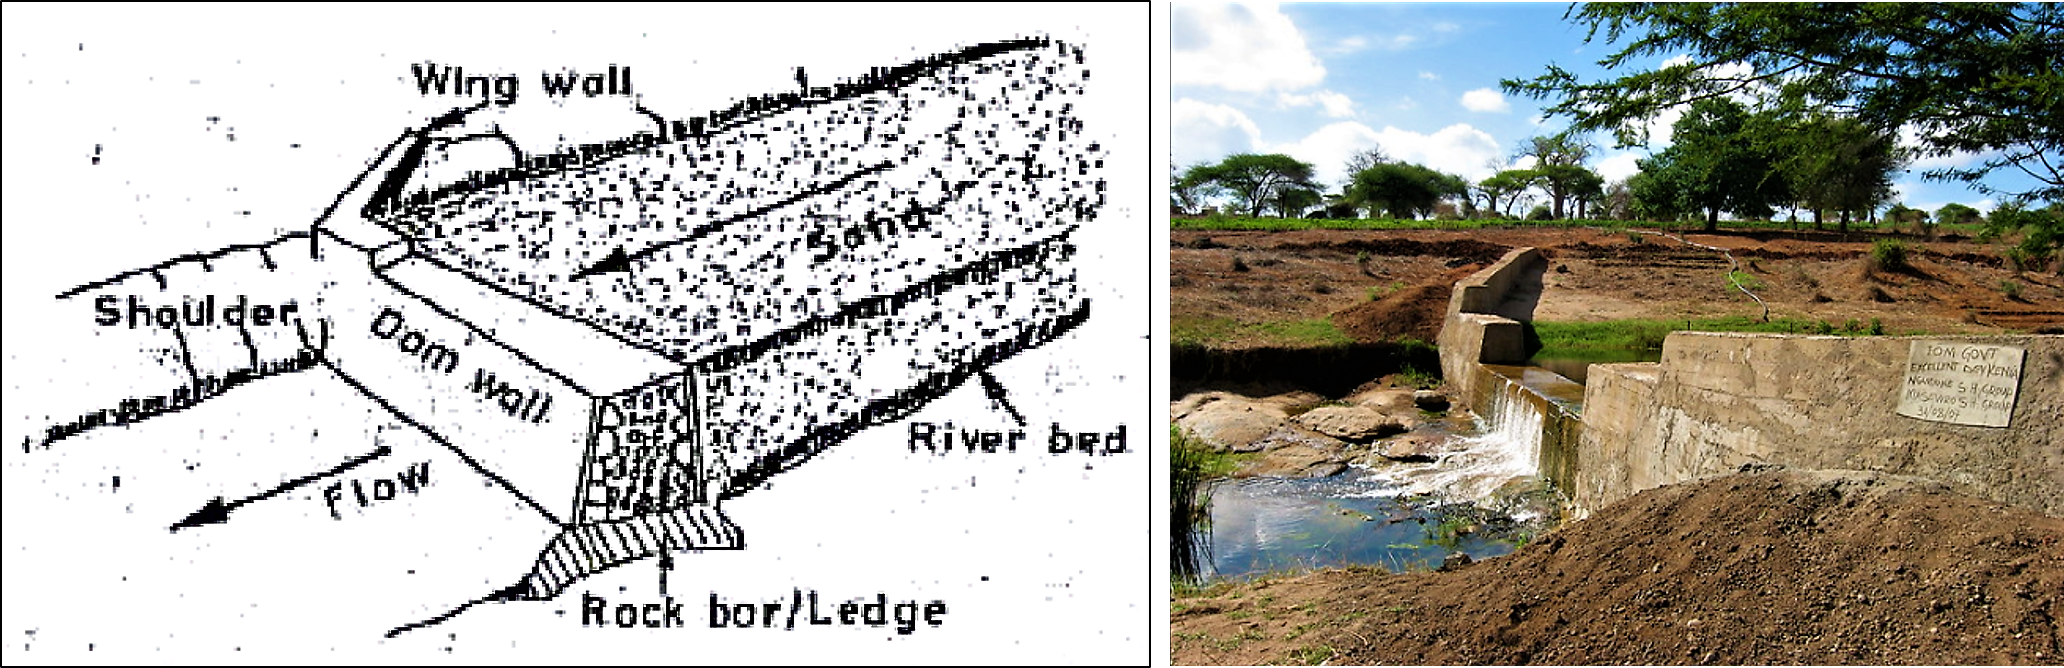 Structure of sand storage dam construction (right) and a sand dam build in Kenya (left). Source: PRACTICAL ACTION (n.y.) and THISISEXCELLENT (2009)